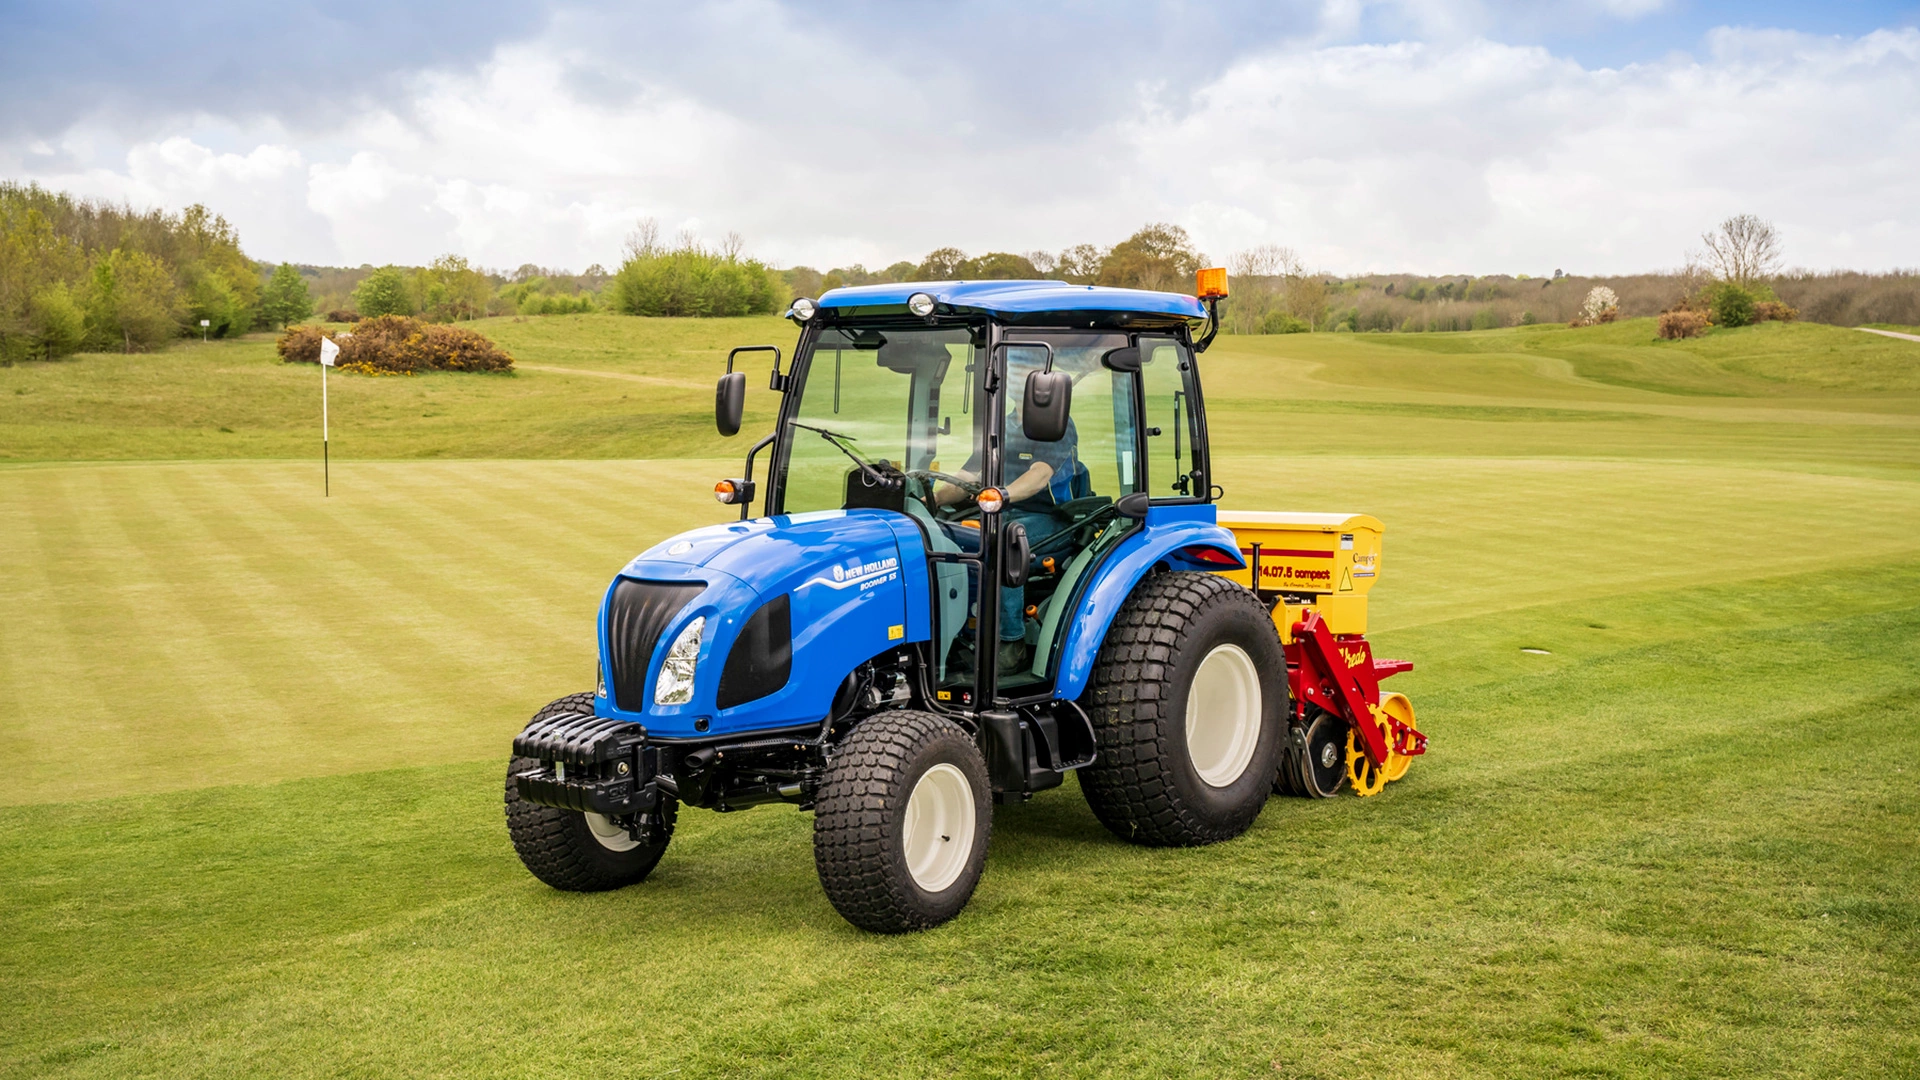 New Holland Boomer 50 tractor working on the agricultural field